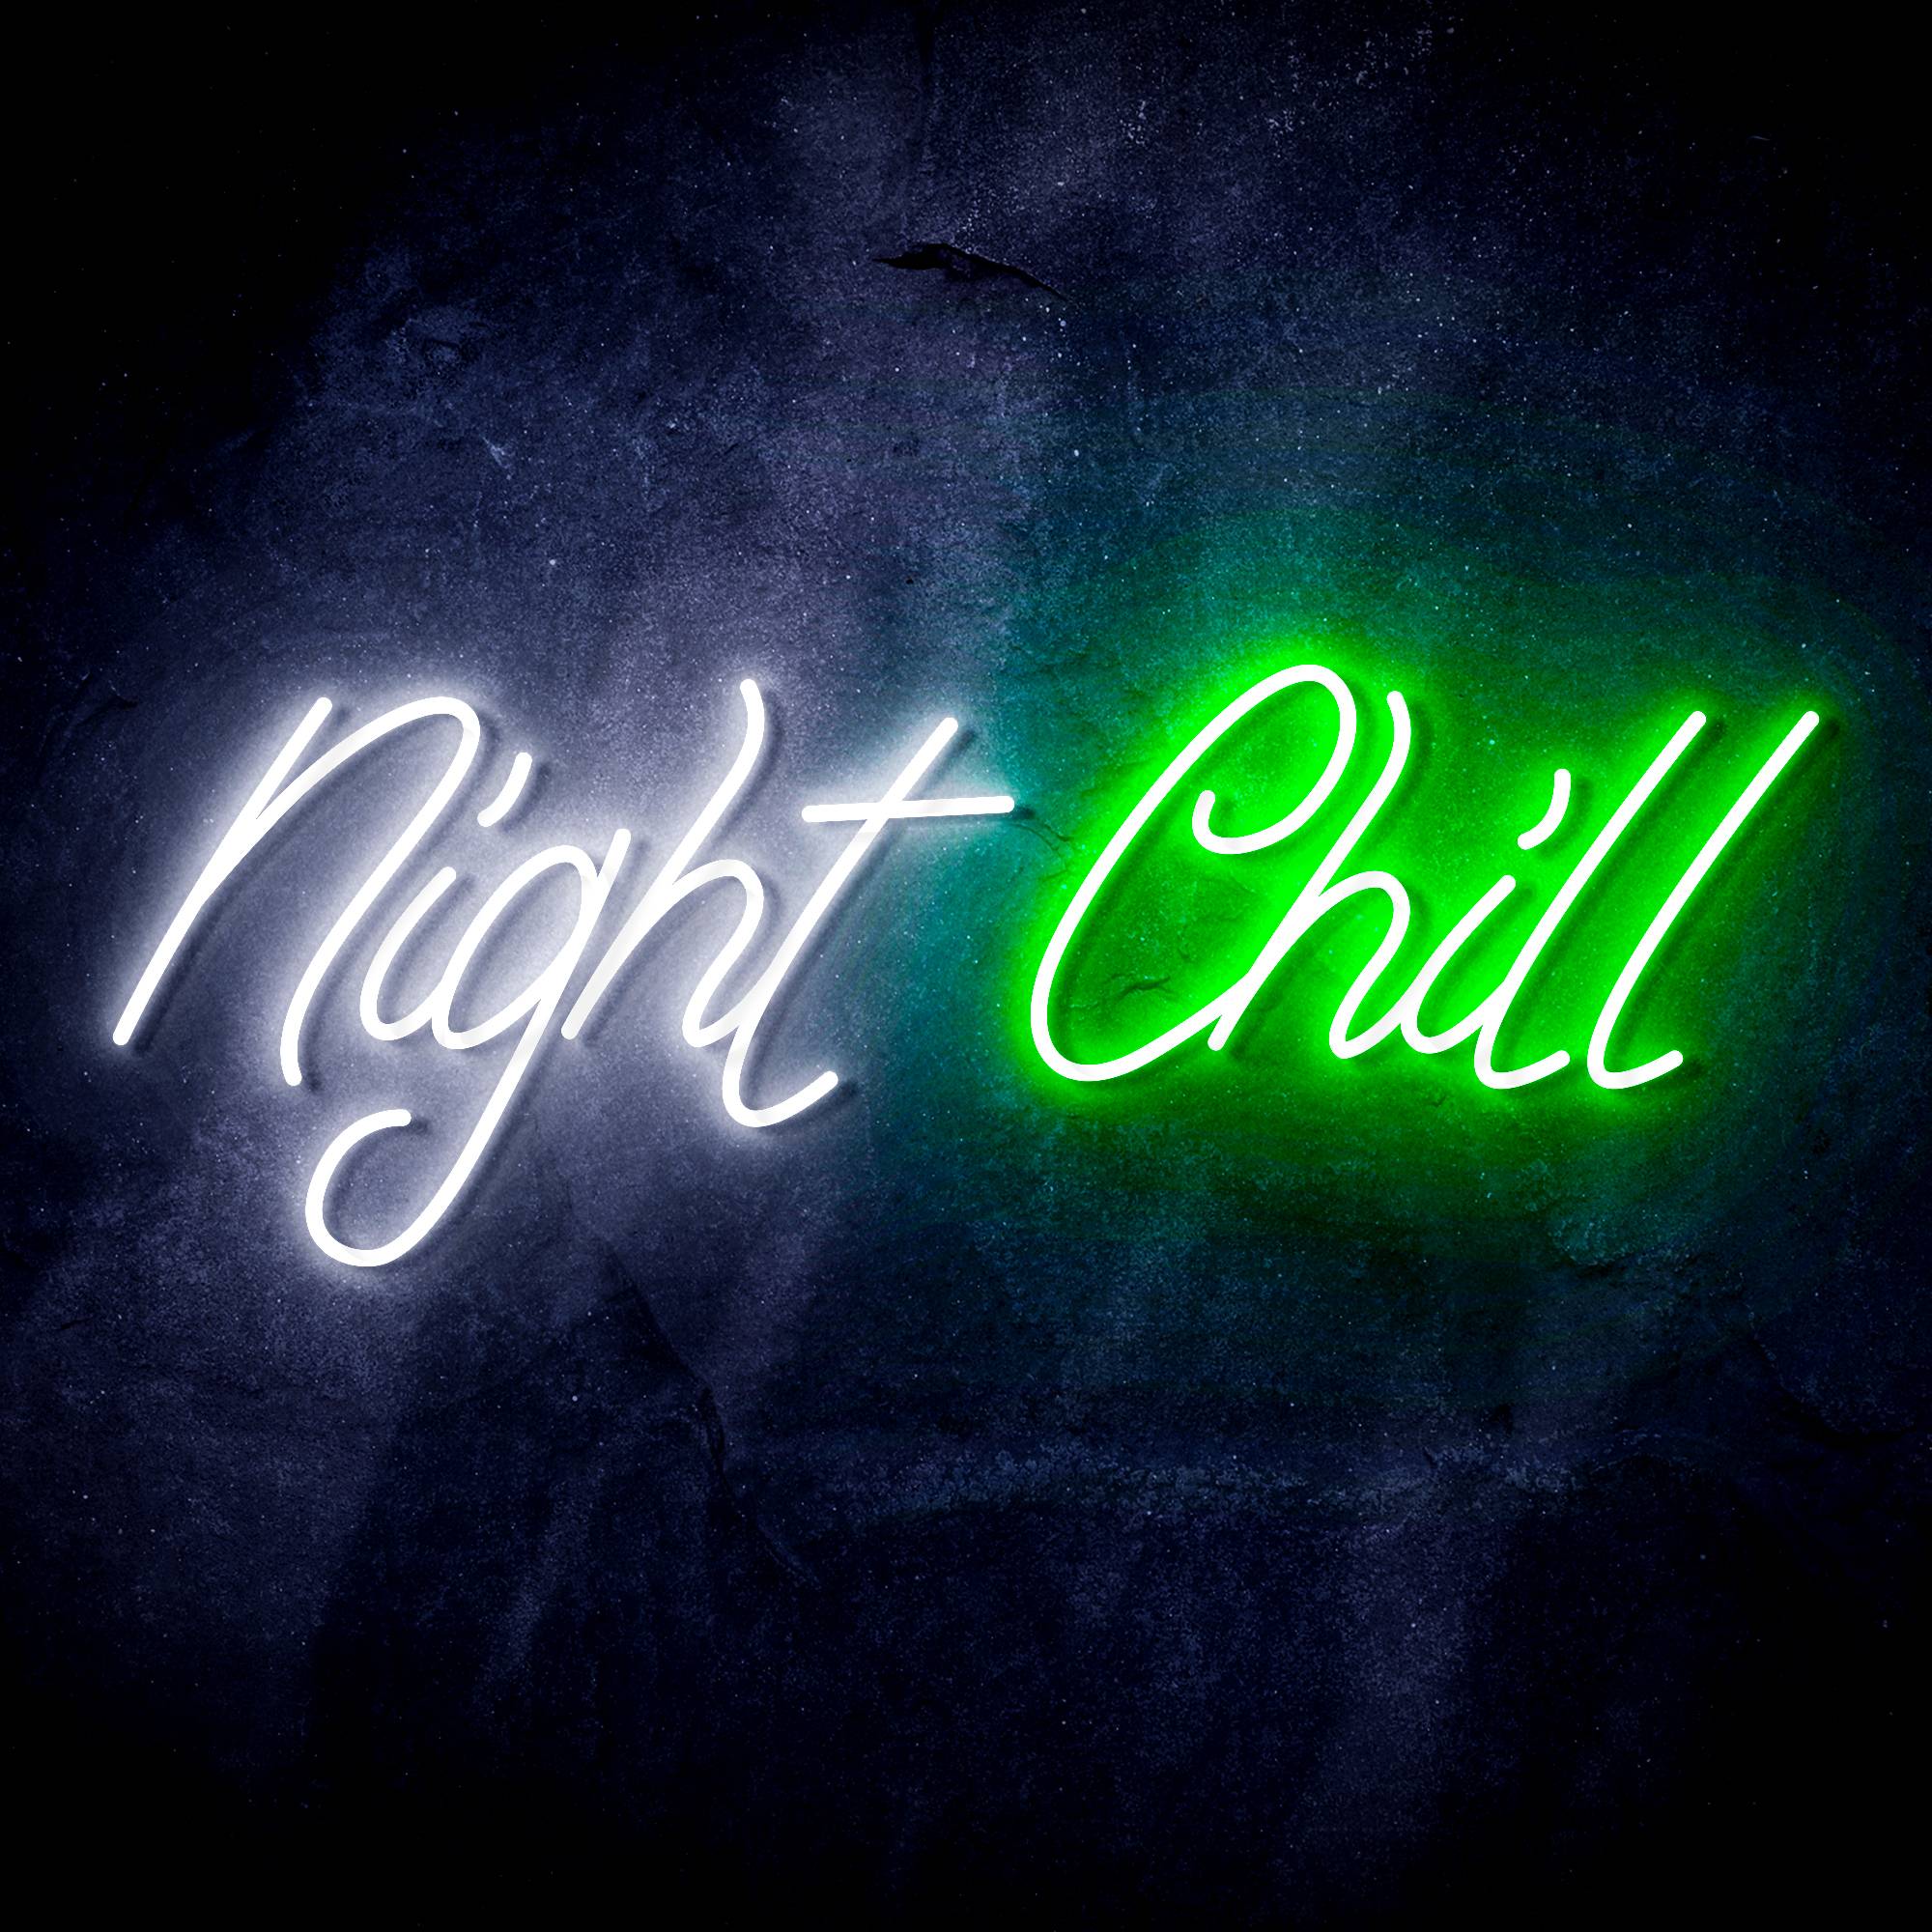 "Night Chill" Text Quote LED Neon Sign